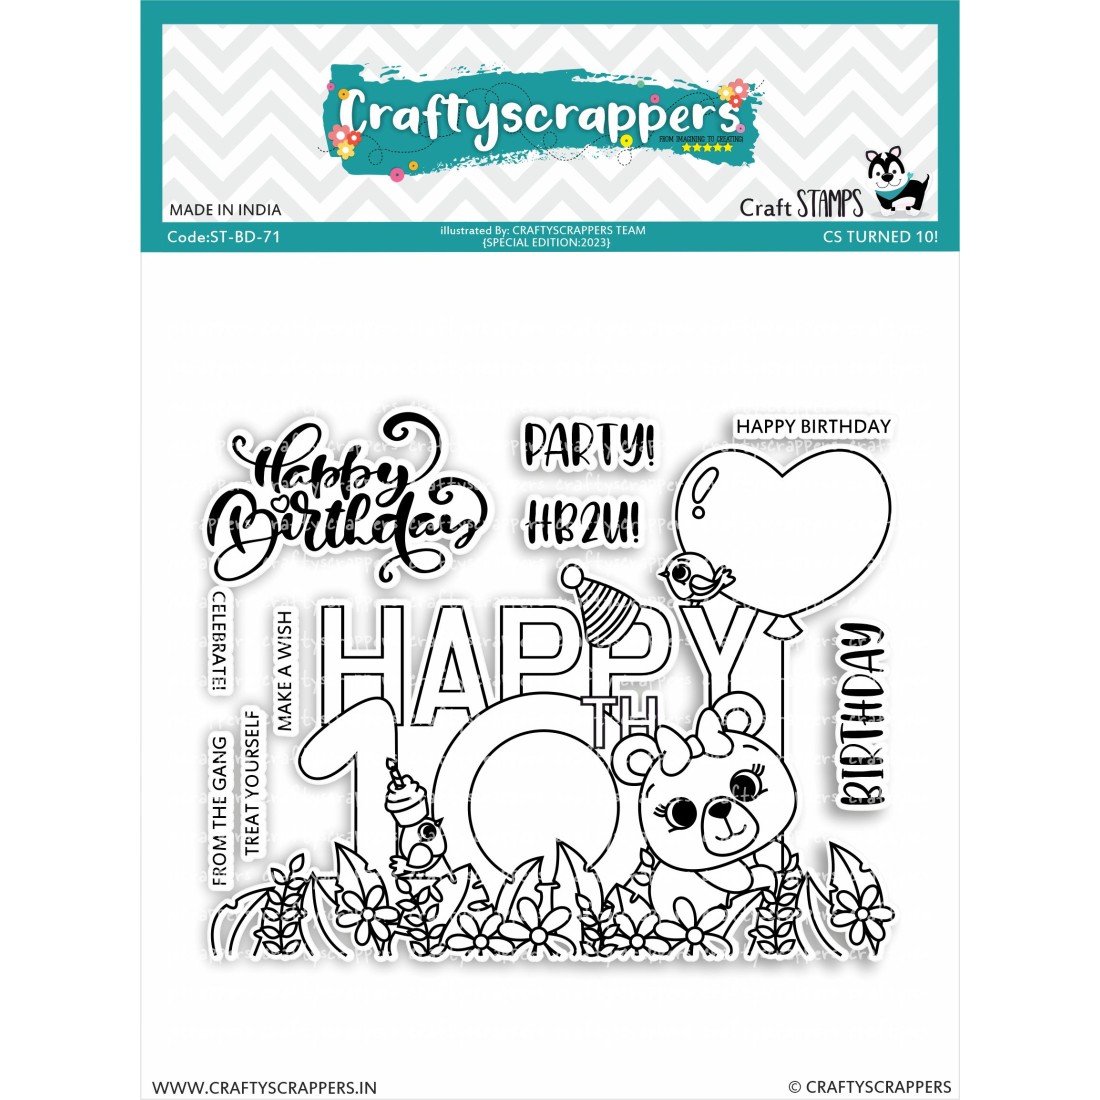 Craftyscrappers Stamps- CS TURNED 10